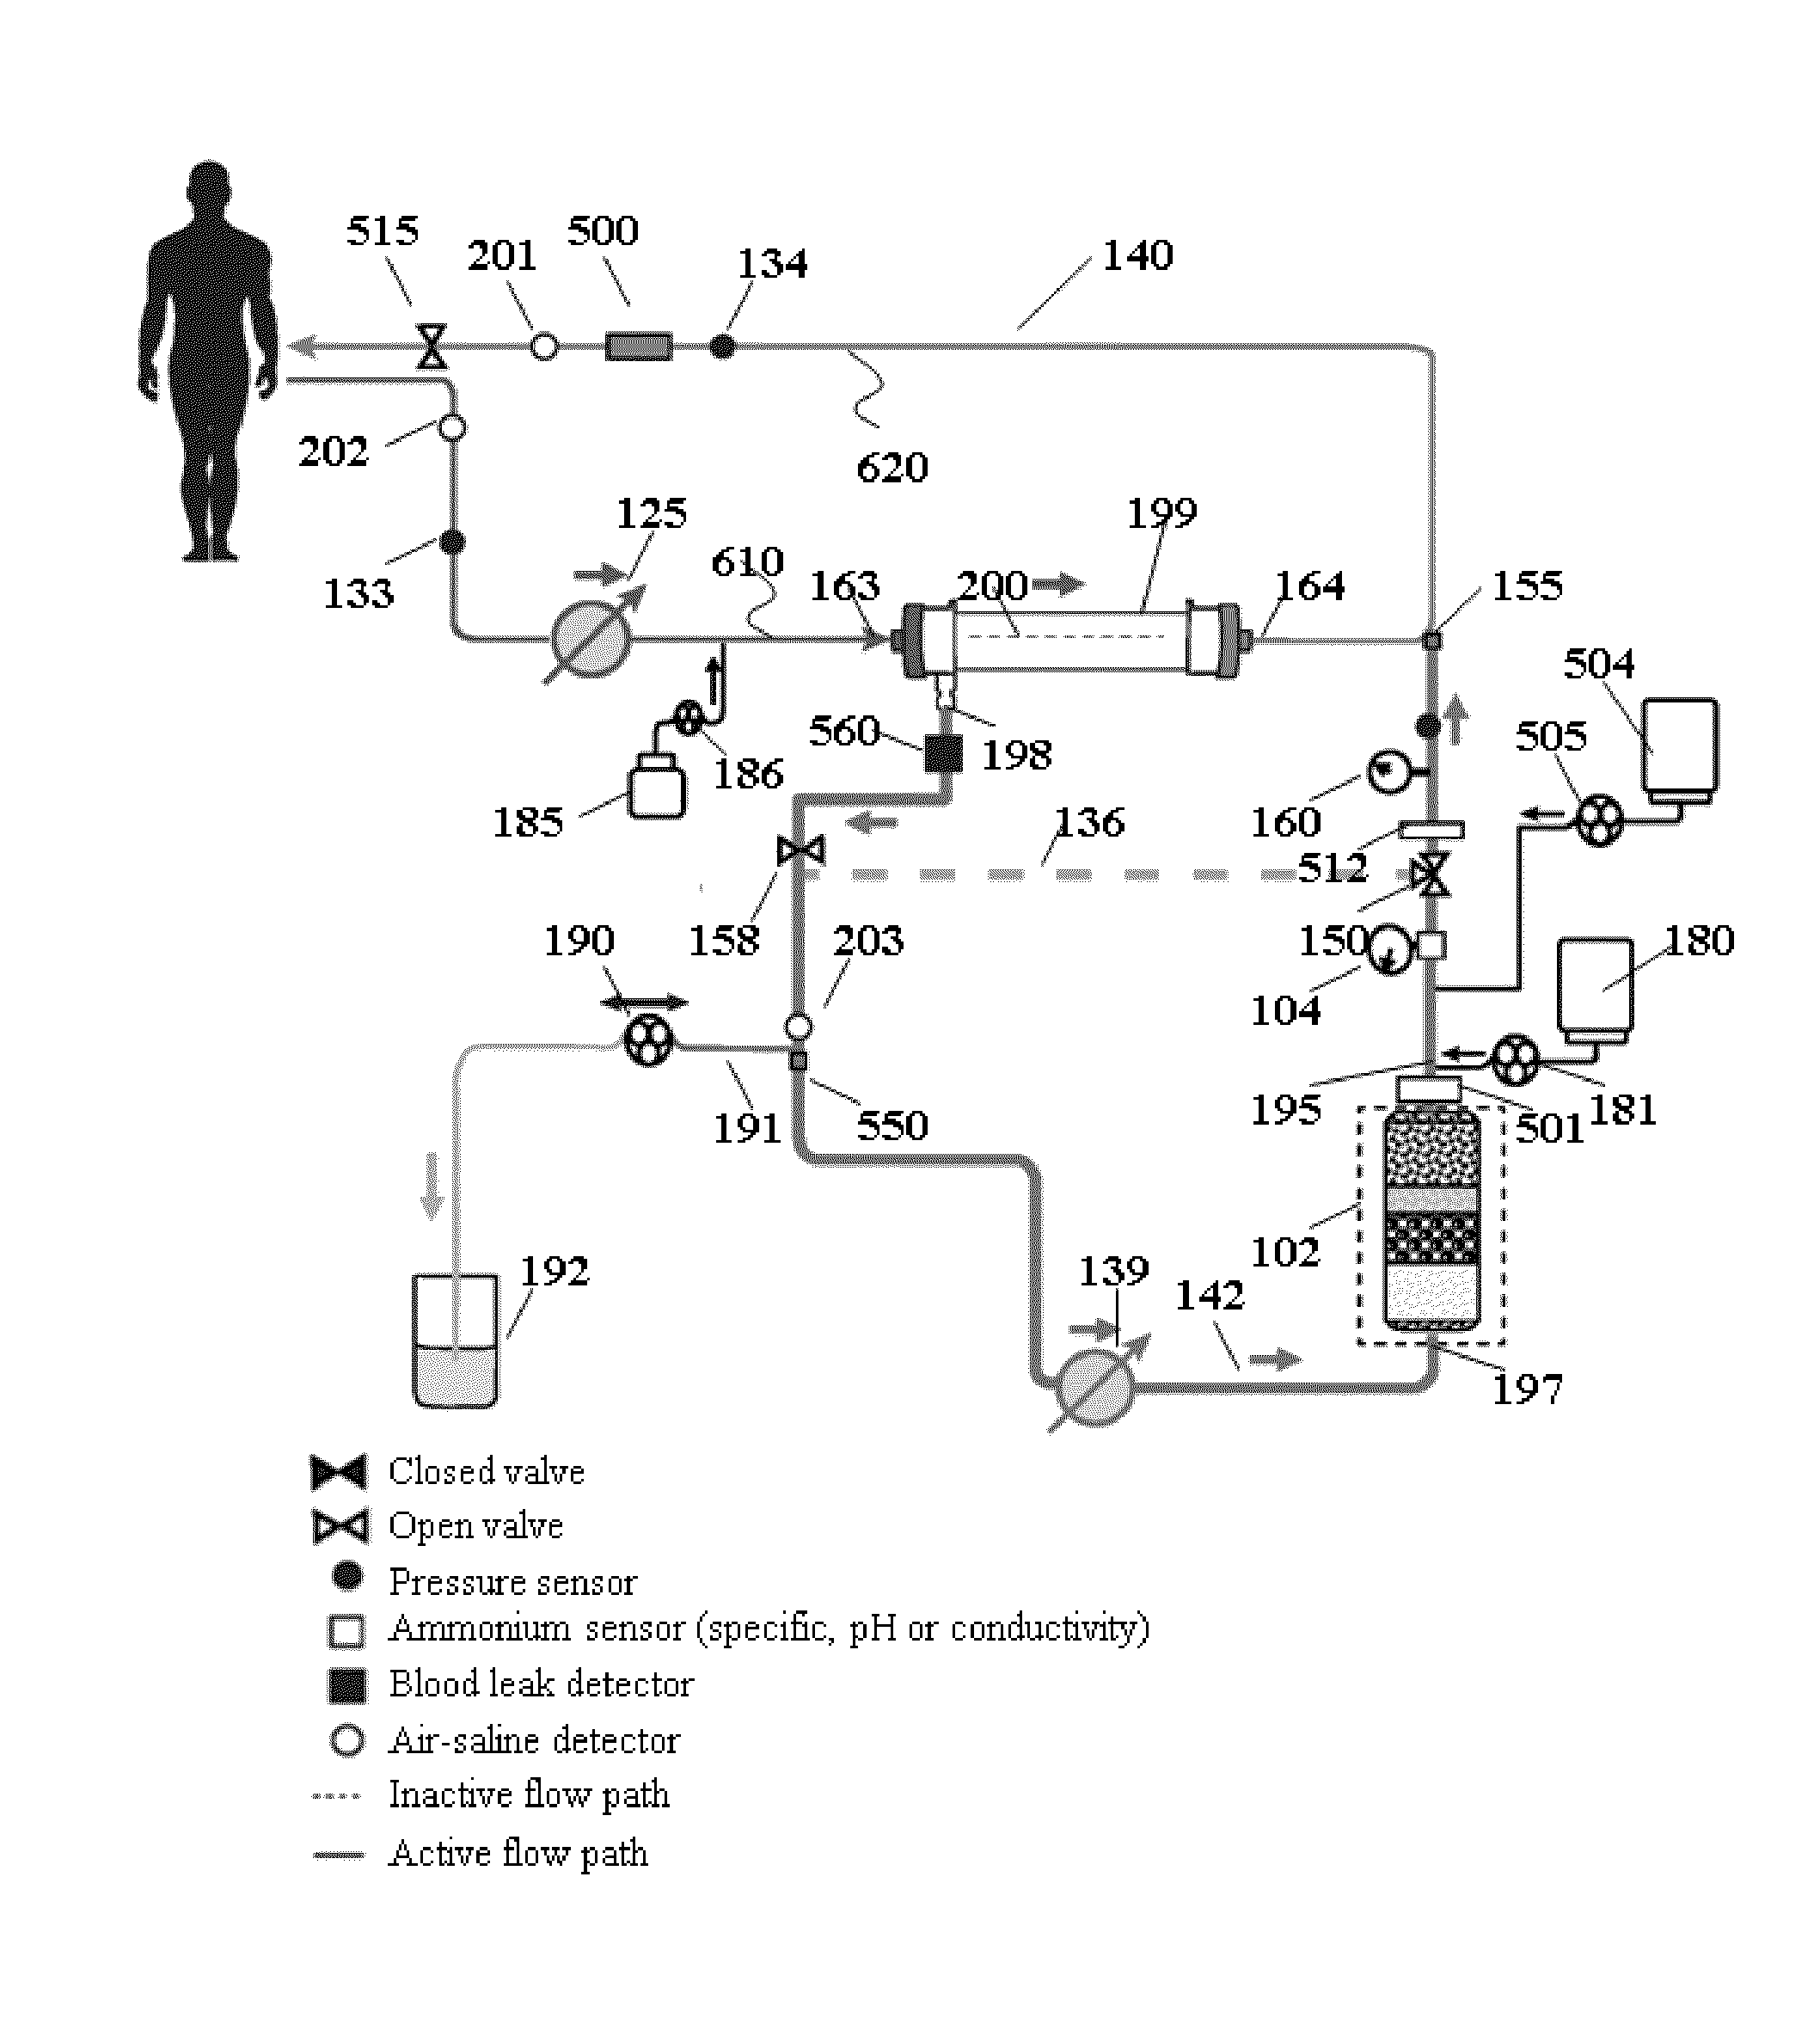 Hemodialysis system having a flow path with a controlled compliant volume